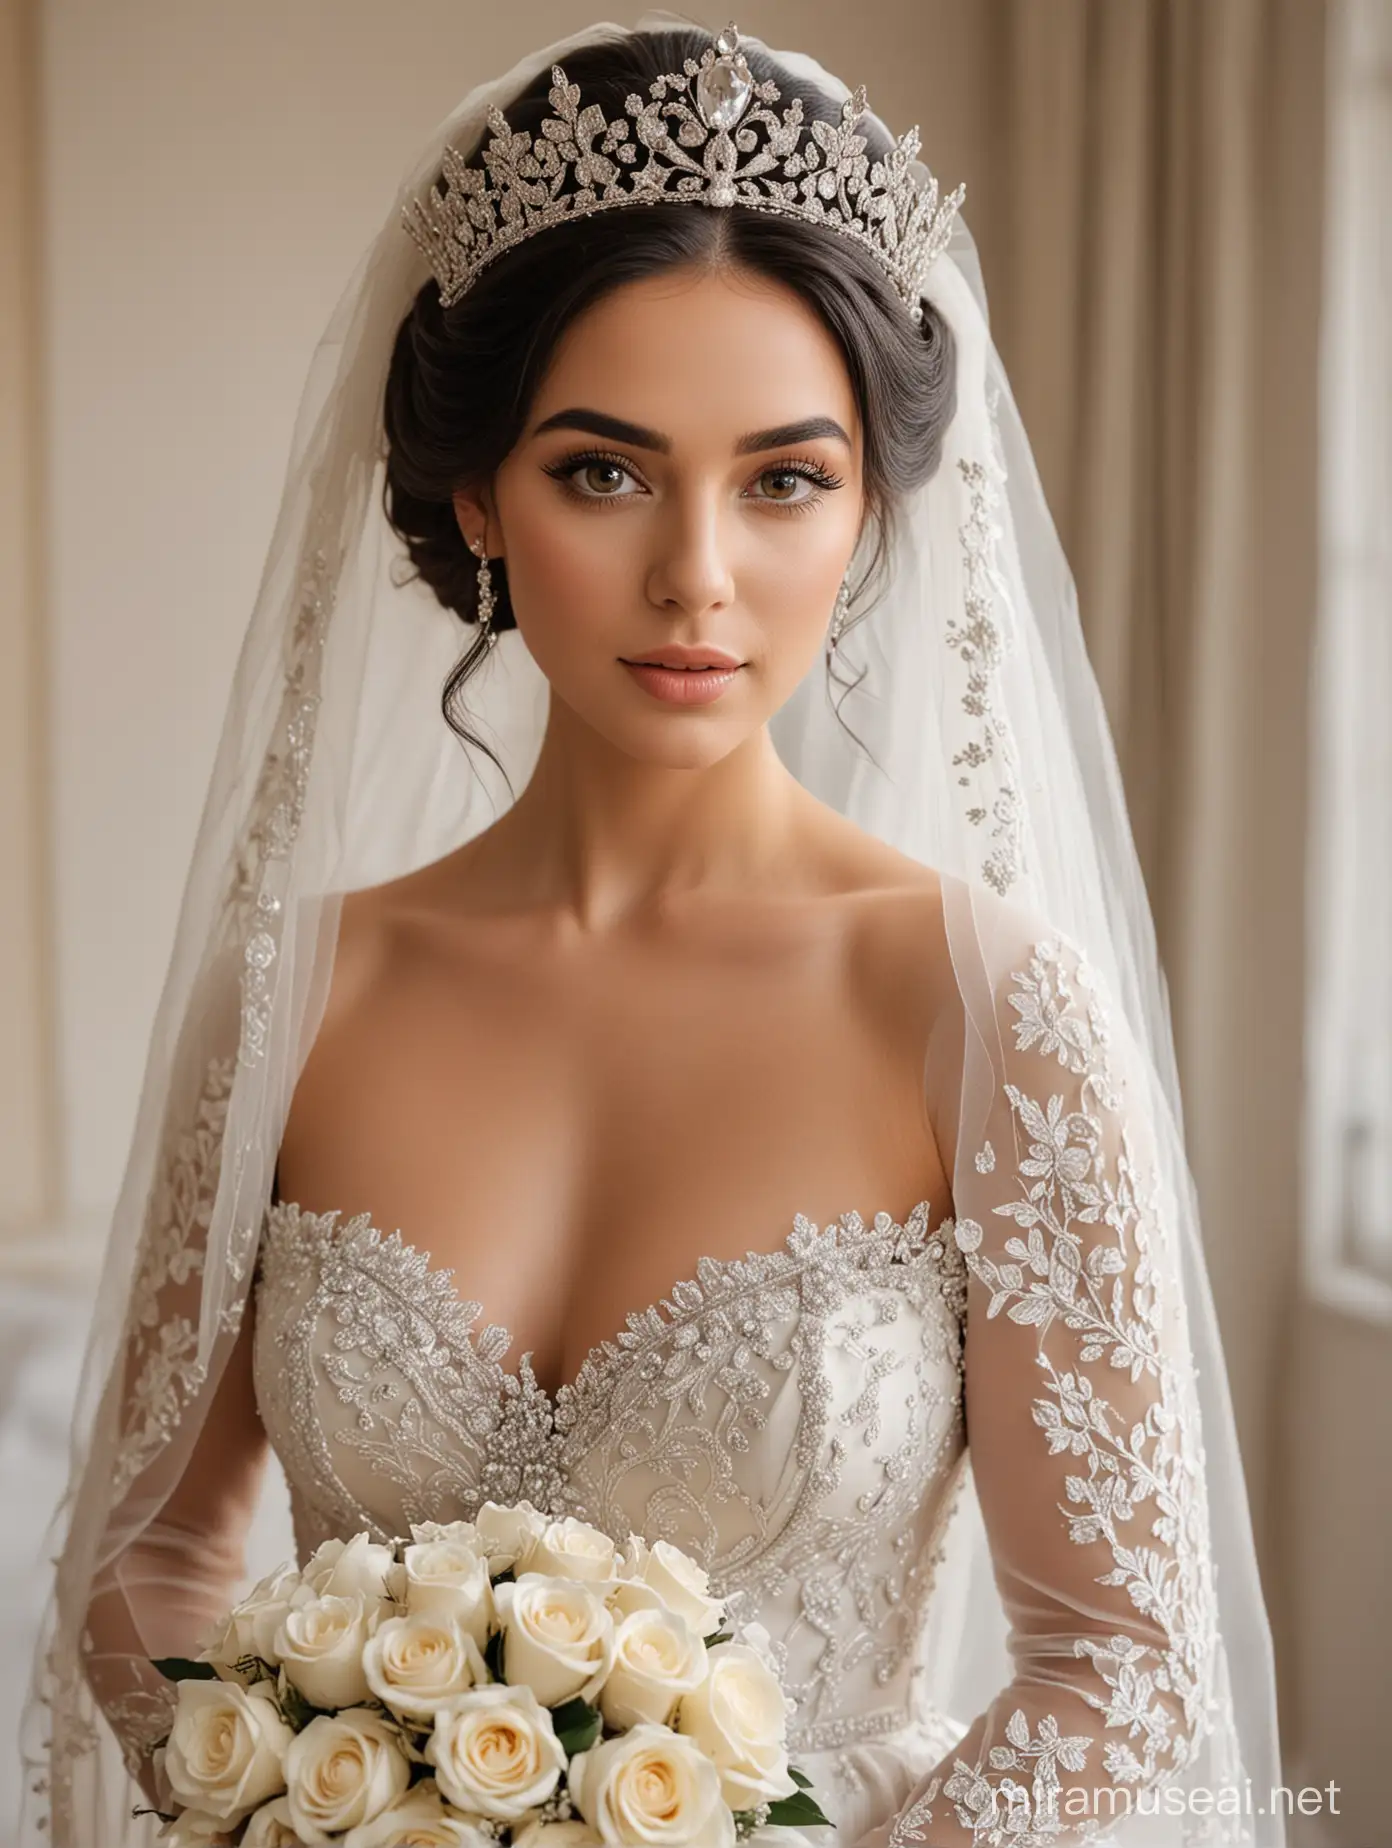 Elegant Bejeweled Bride in Luxurious Lace Gown with Silver Tiara